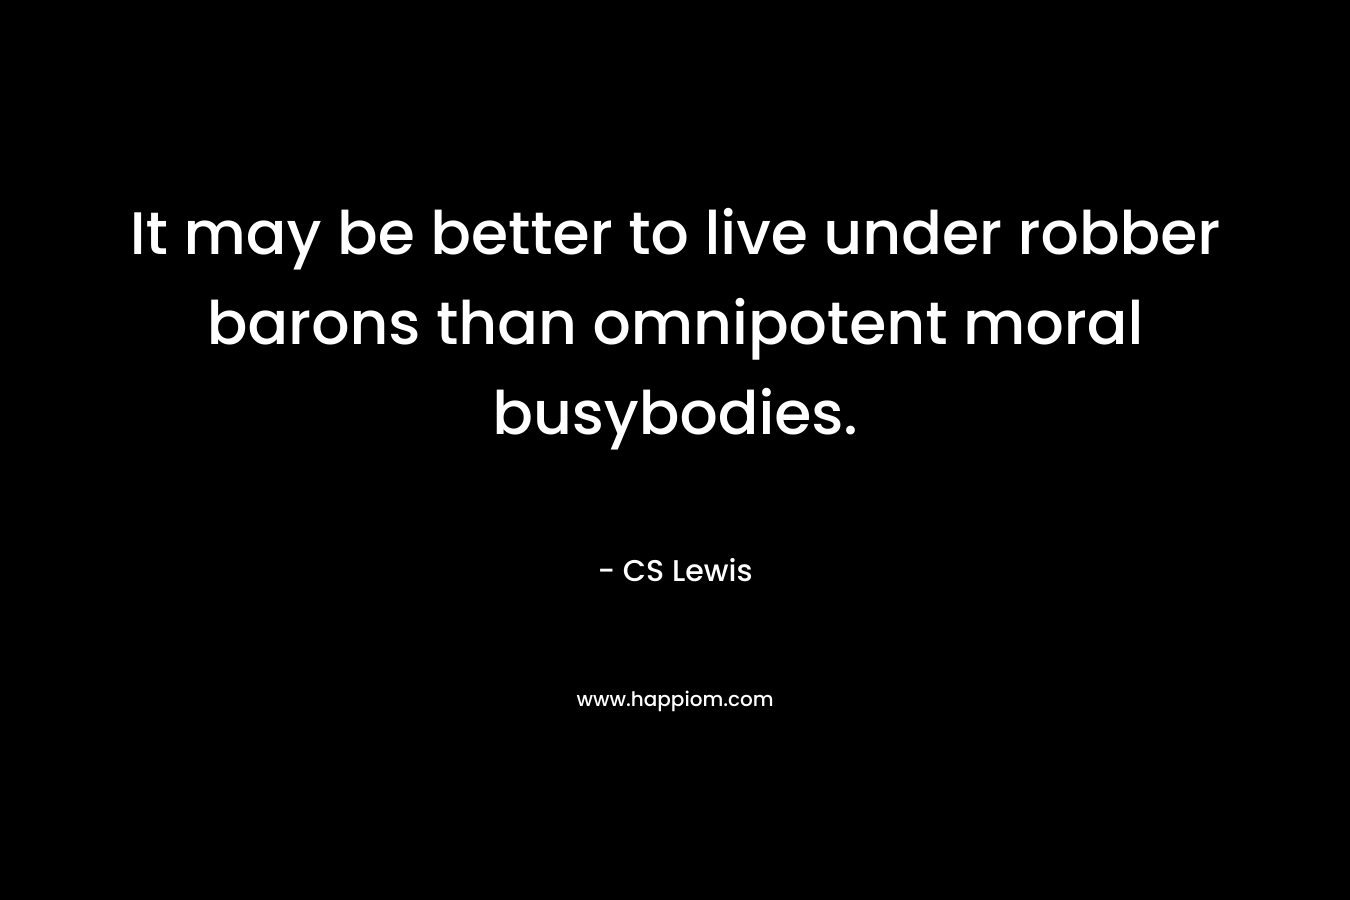 It may be better to live under robber barons than omnipotent moral busybodies. – CS Lewis